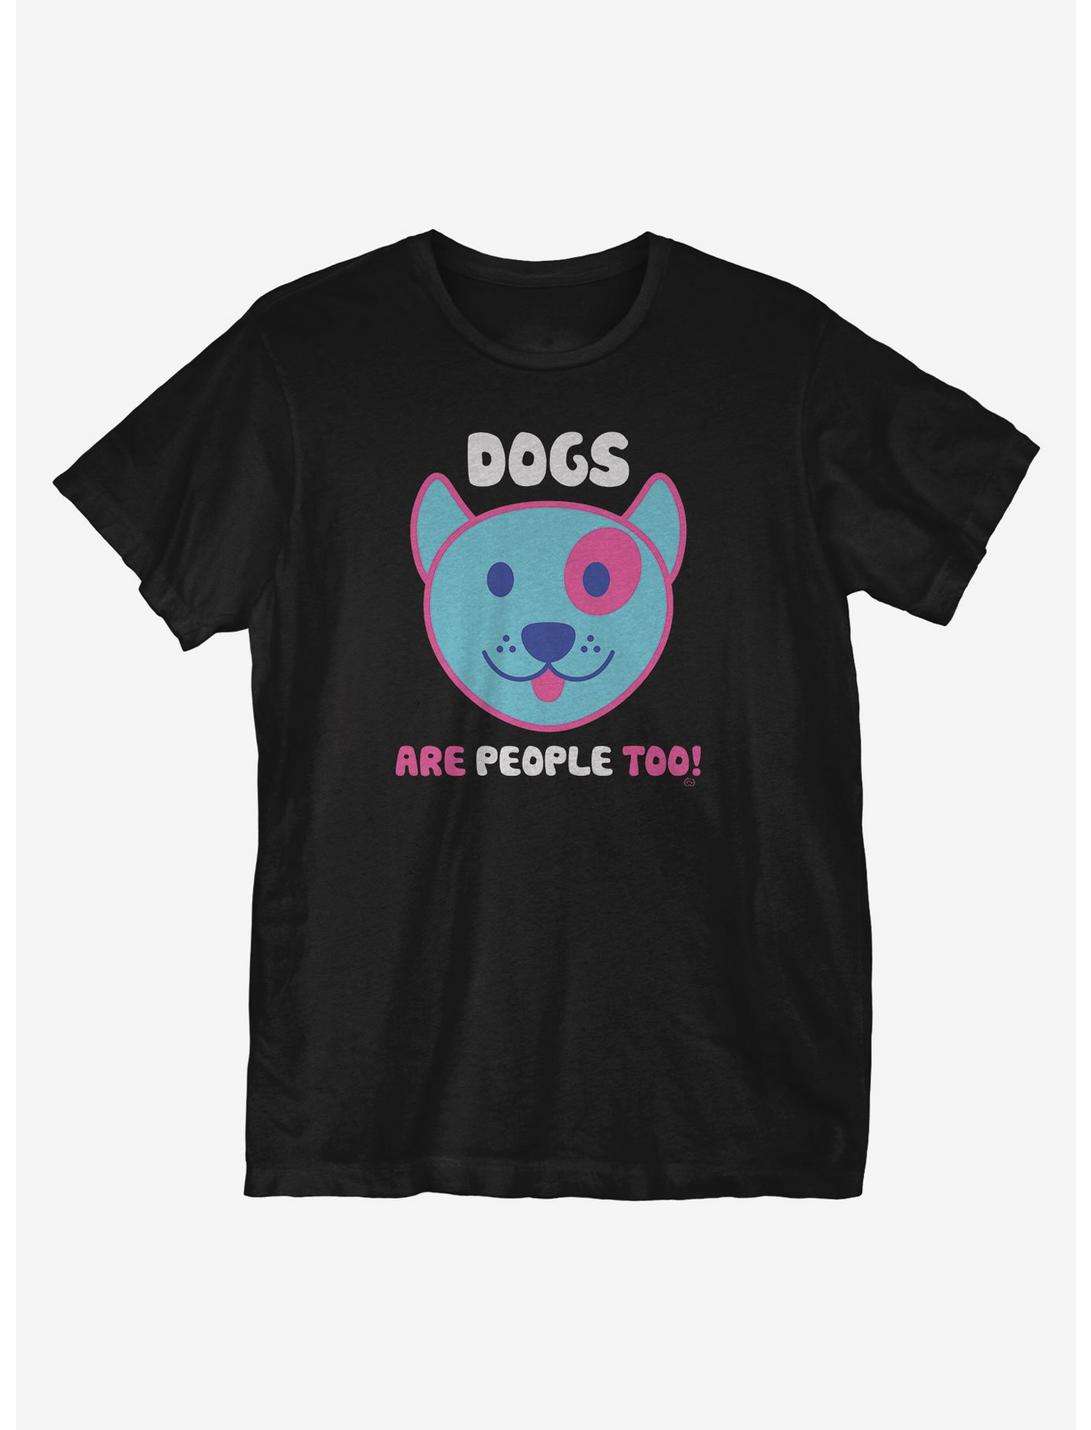 Dogs Are People Too T-Shirt, BLACK, hi-res